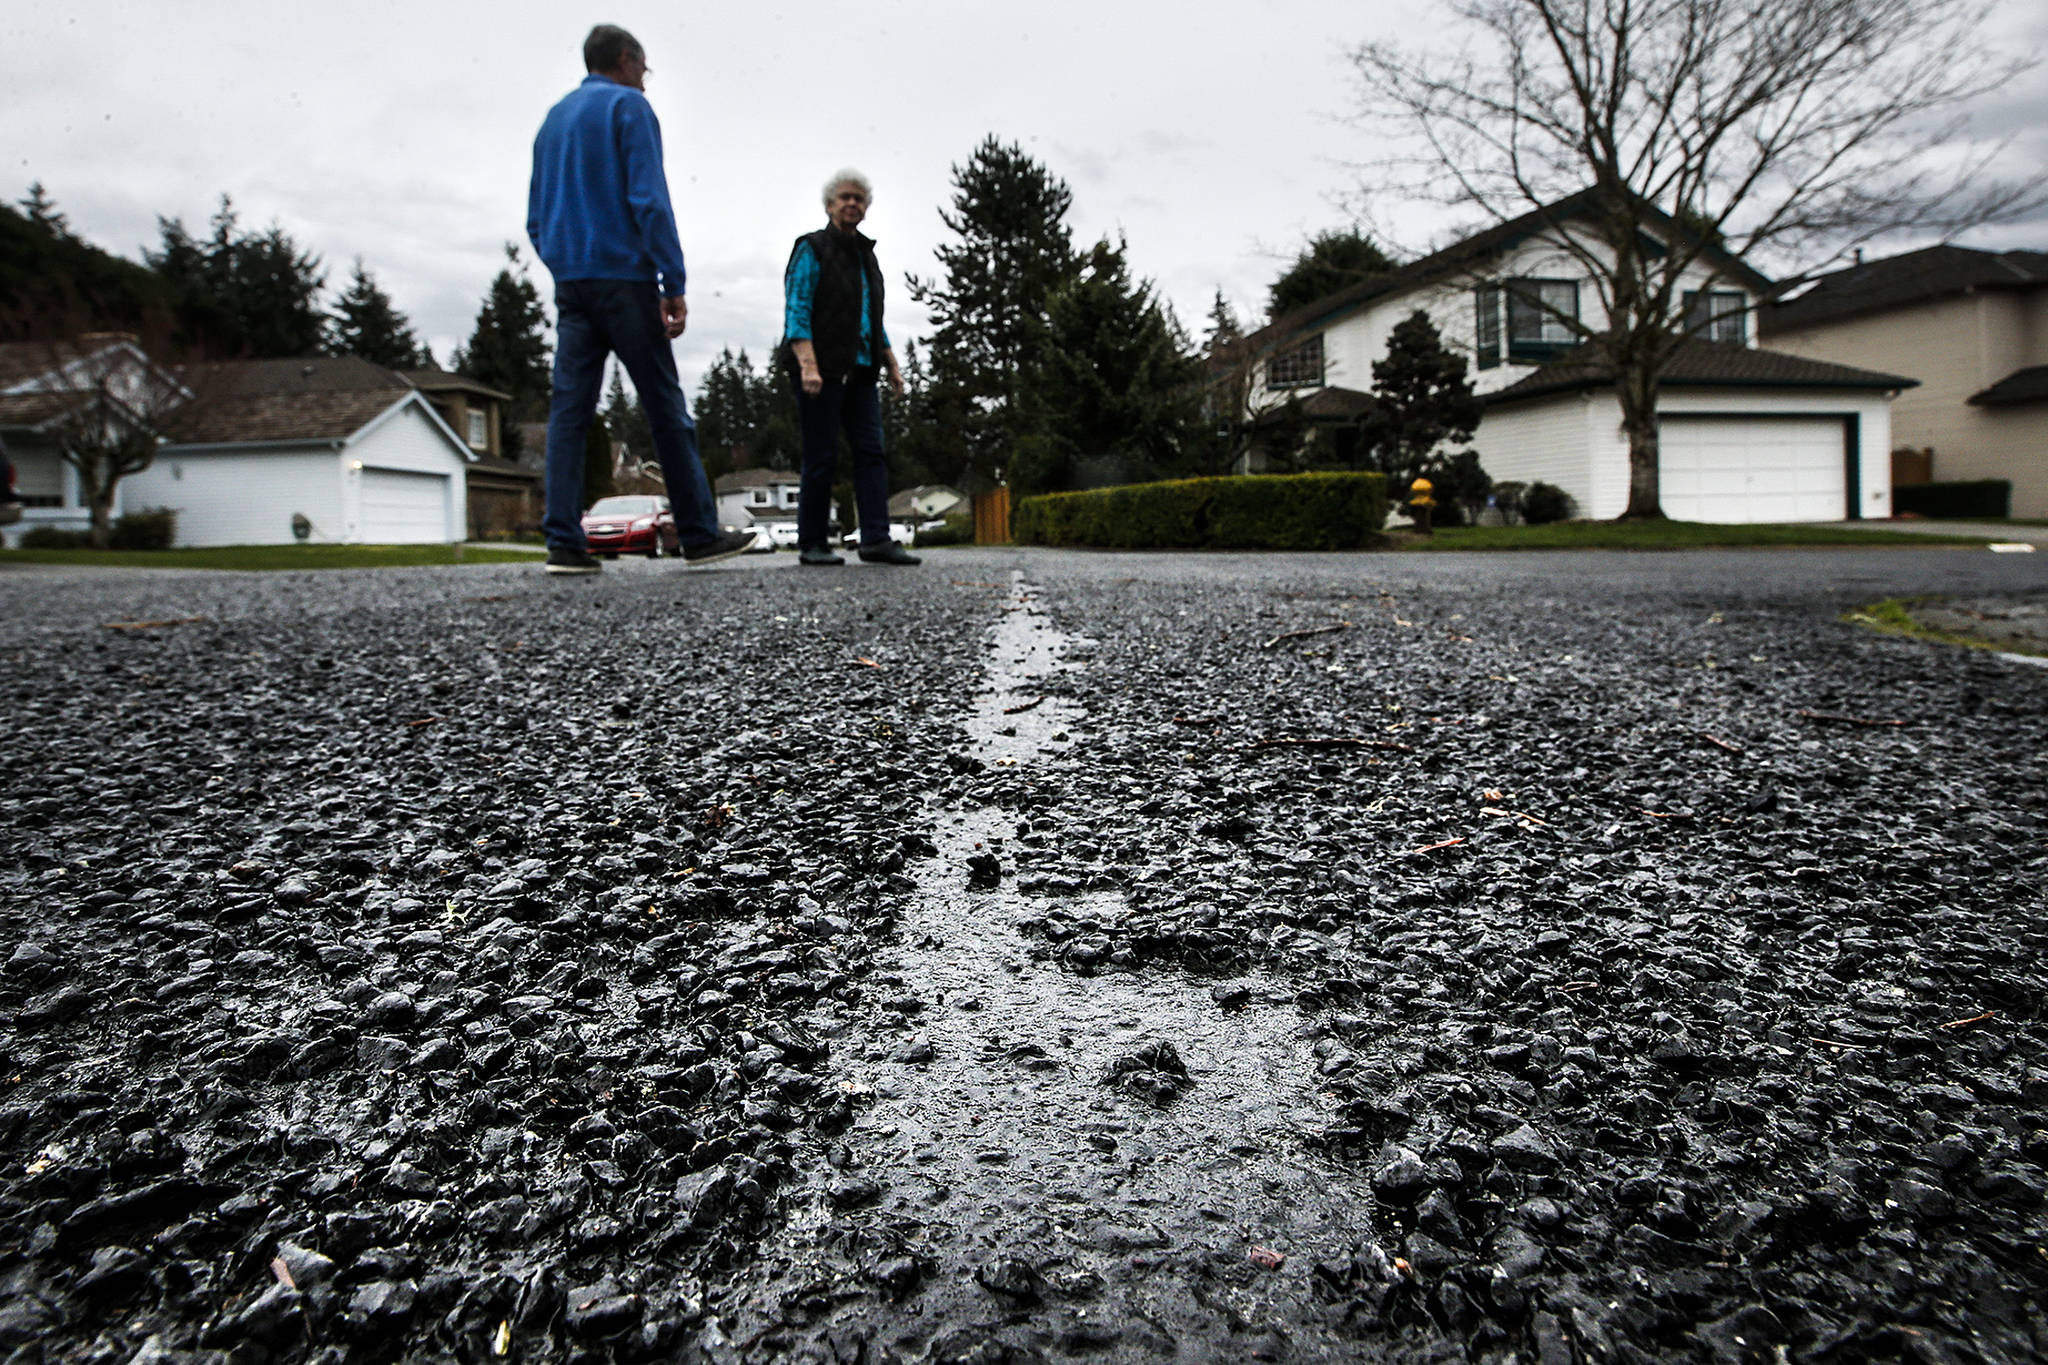 Allen and Bundie Olsen walk near a broken patch of chip seal on Tuesday close to their home in the Wildflower neighborhood of Mill Creek. The rough surface was layed in July and August of 2016 and has since caused problems for residents like the Olsens whose yard and driveway are constantly filled with rocks from the street. (Ian Terry / The Herald)